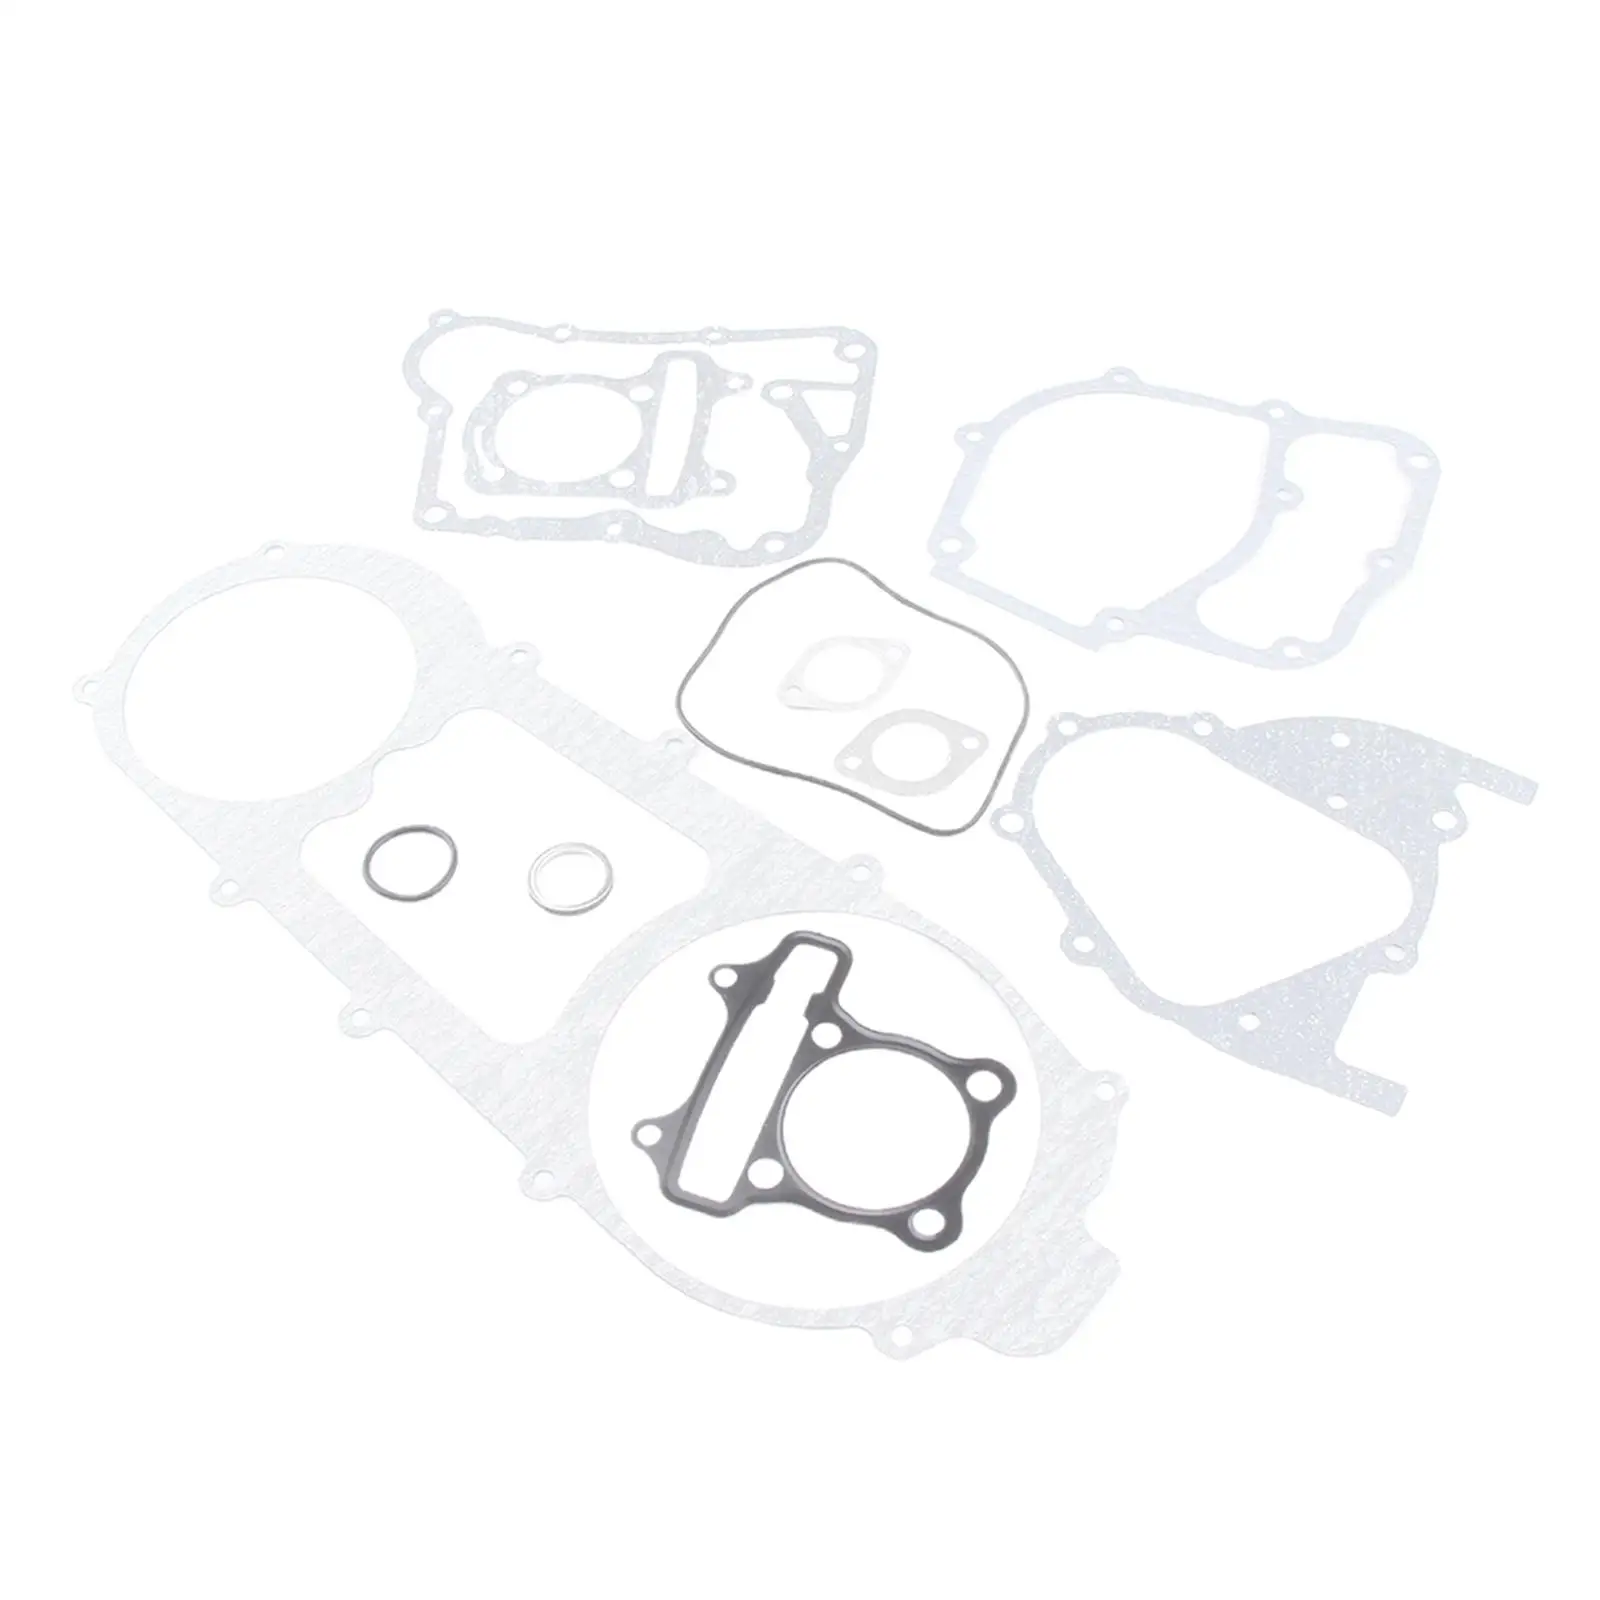 Complete Engine Head Gasket Set for GY6 150cc Moped Scooters   Go Karts